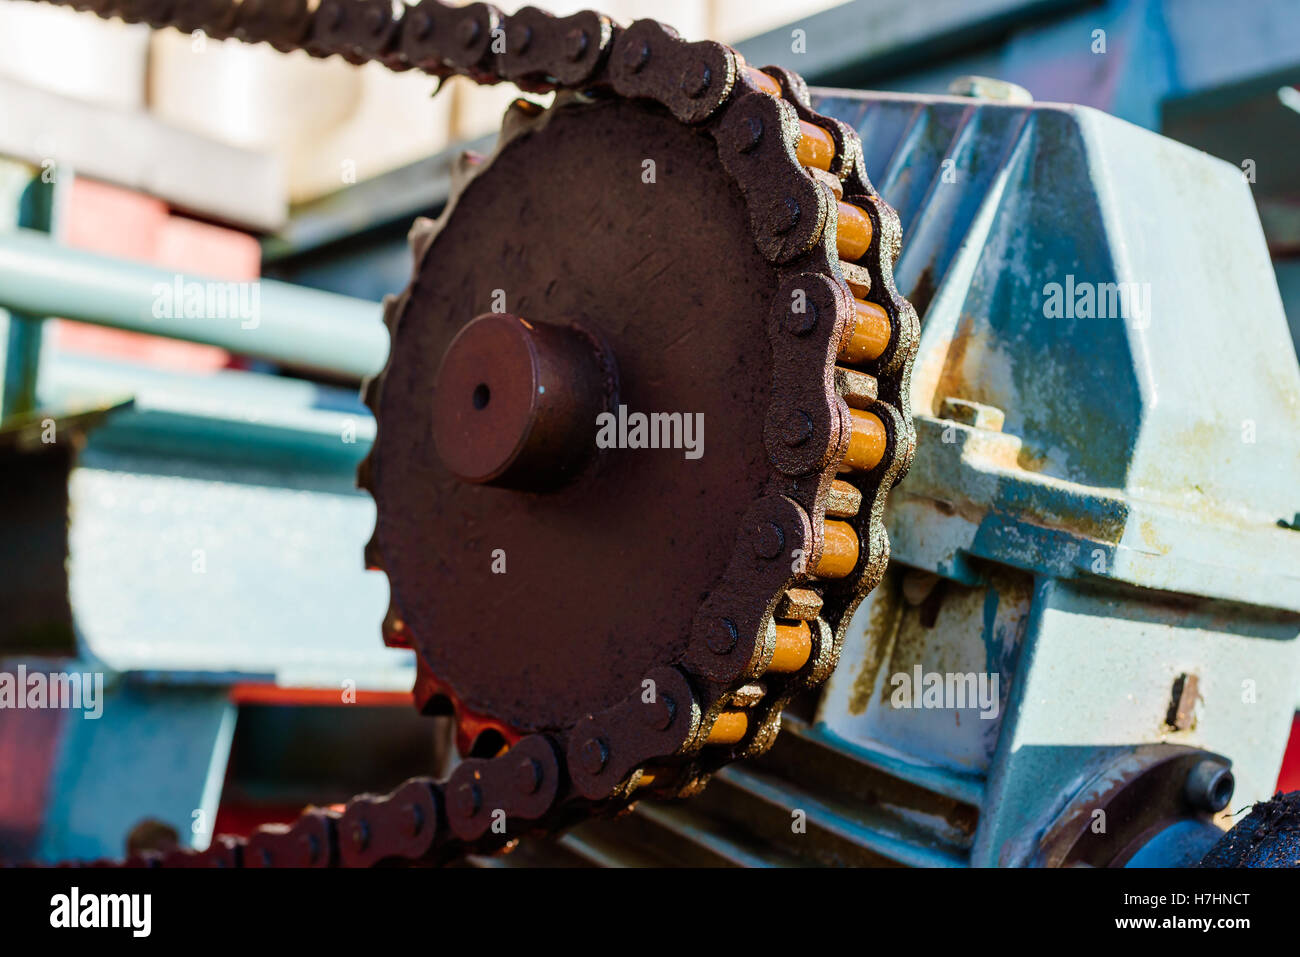 Industrial cogwheel and chain with grease and dirt Stock Photo